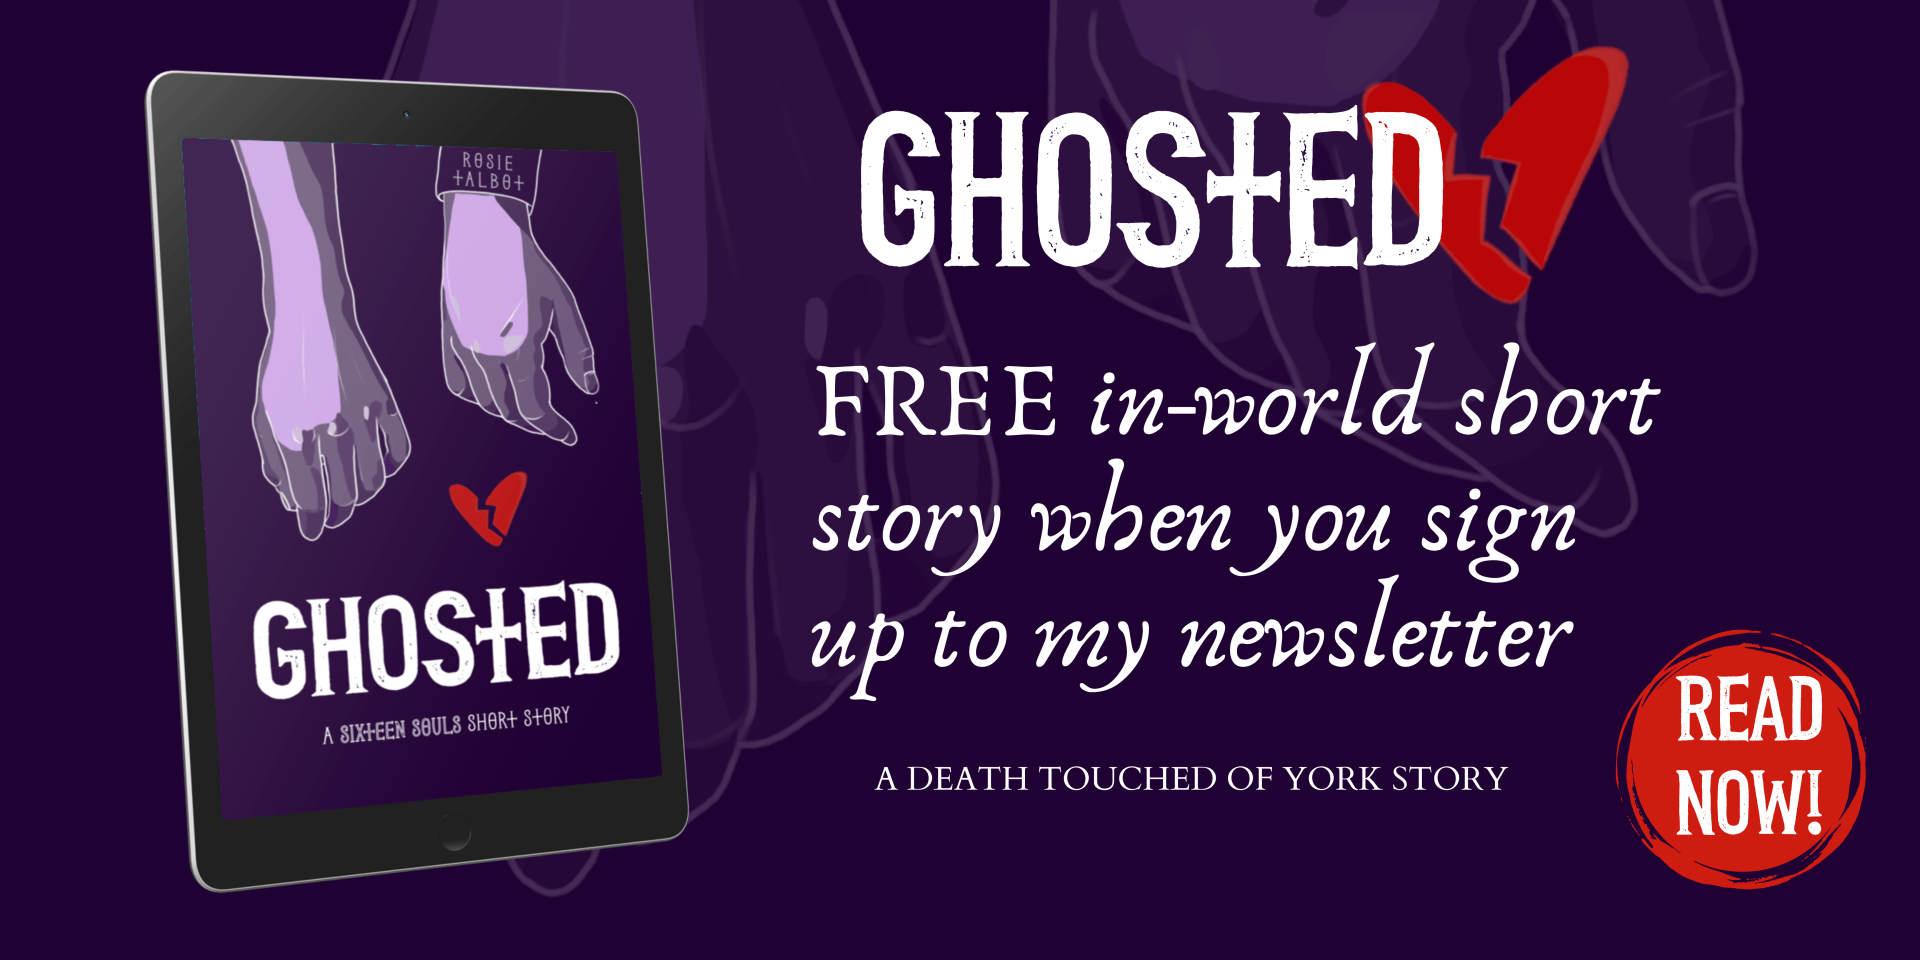 An advertisement for ghosted free in-world short story when you sign up to my newsletter